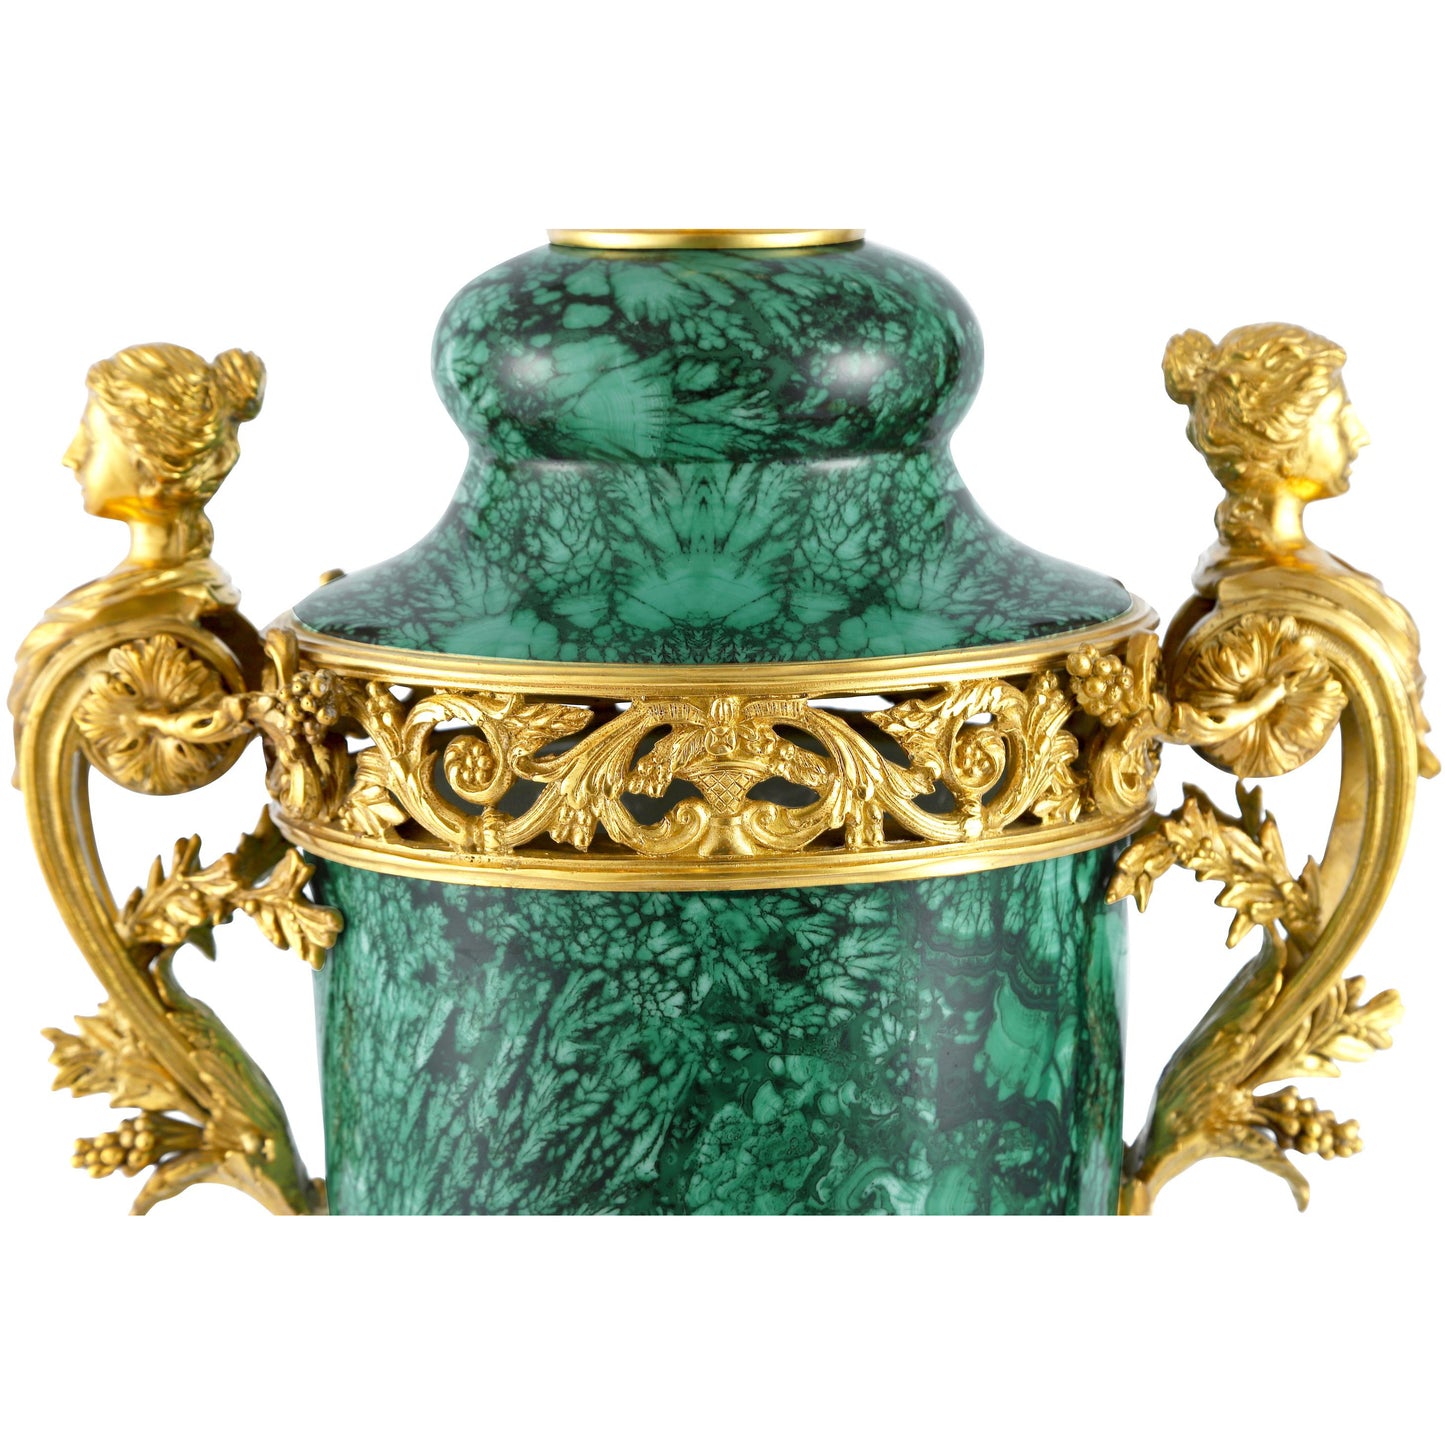 DECOELEVEN ™ Bronze and Porcelain Jar in Classic Green